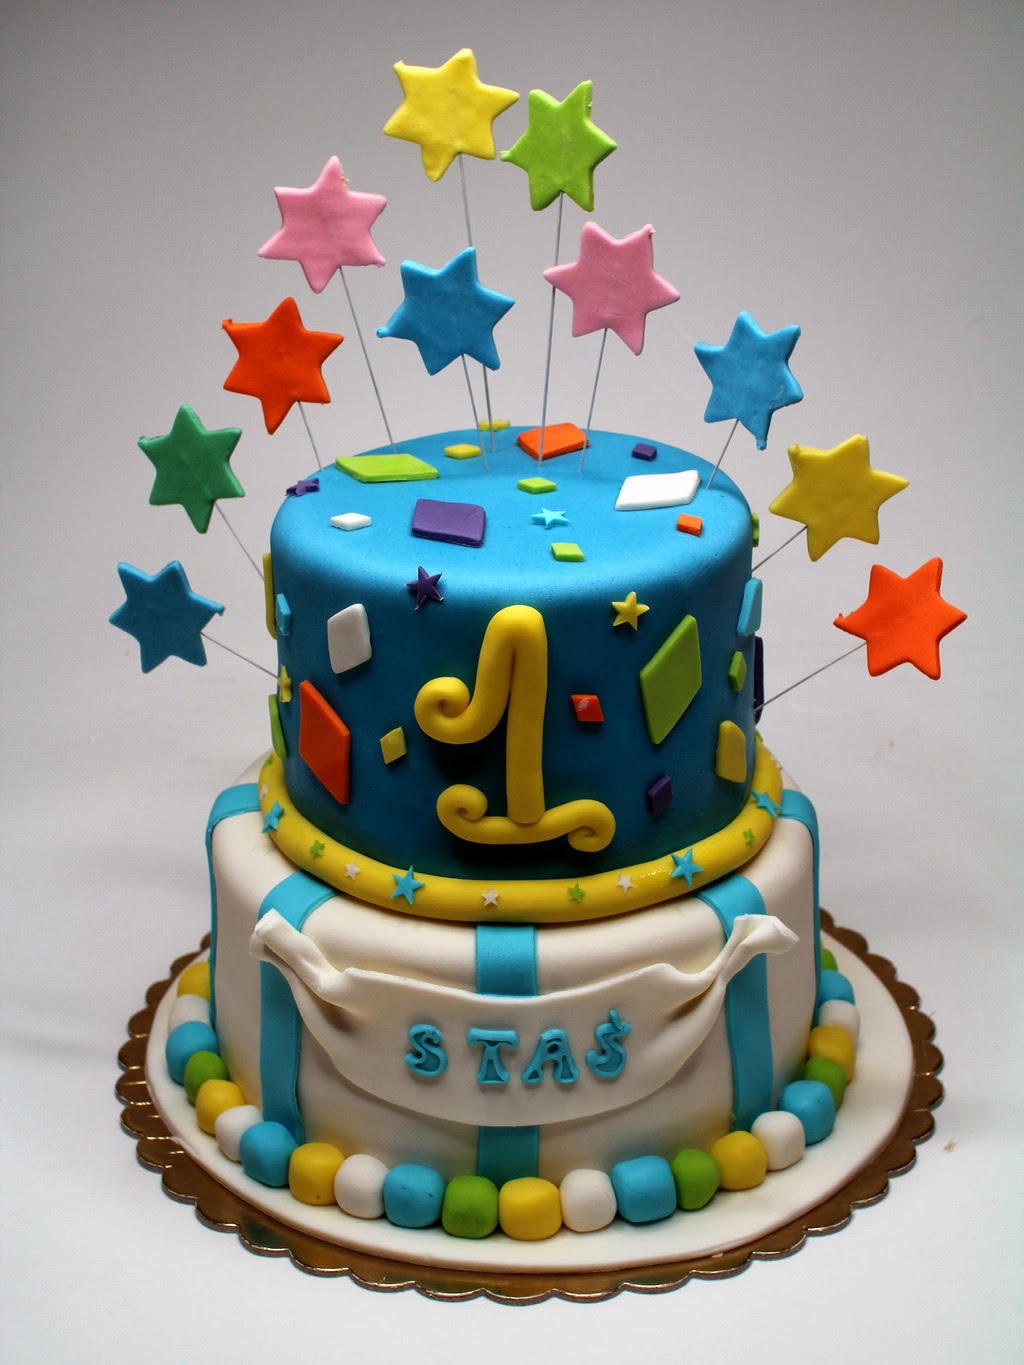 Finding A Kid’s Birthday Cake Is The Primary Rung In Arranging A Little Boy’s Birthday Soiree